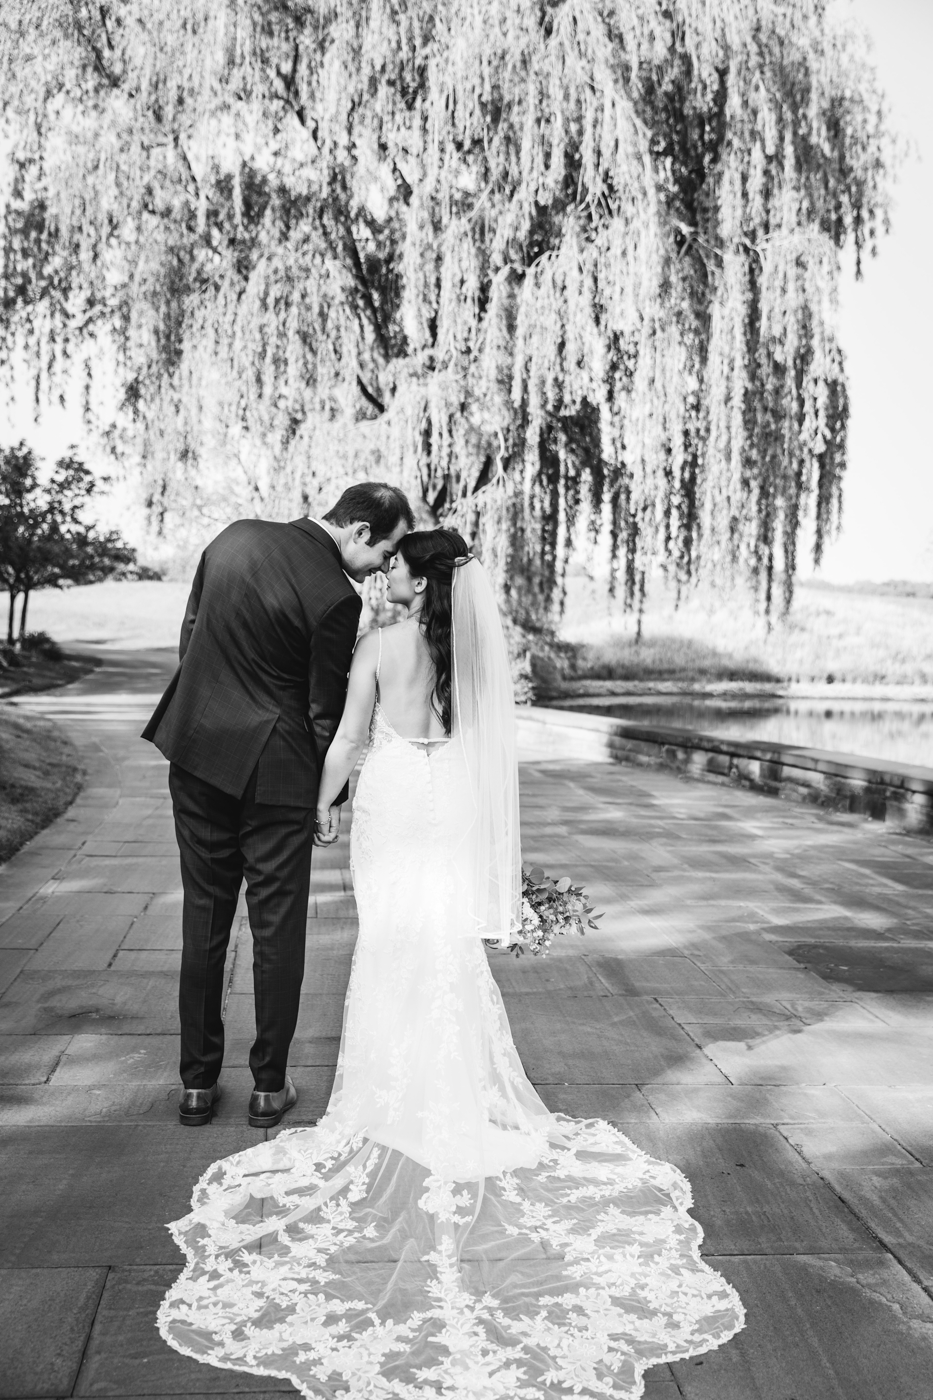  Black and white photo of a Bride and Groom with their backs to the camera and the Bride’s beautiful lace train on display during their elegant wedding at Lodge at Turning Stone 